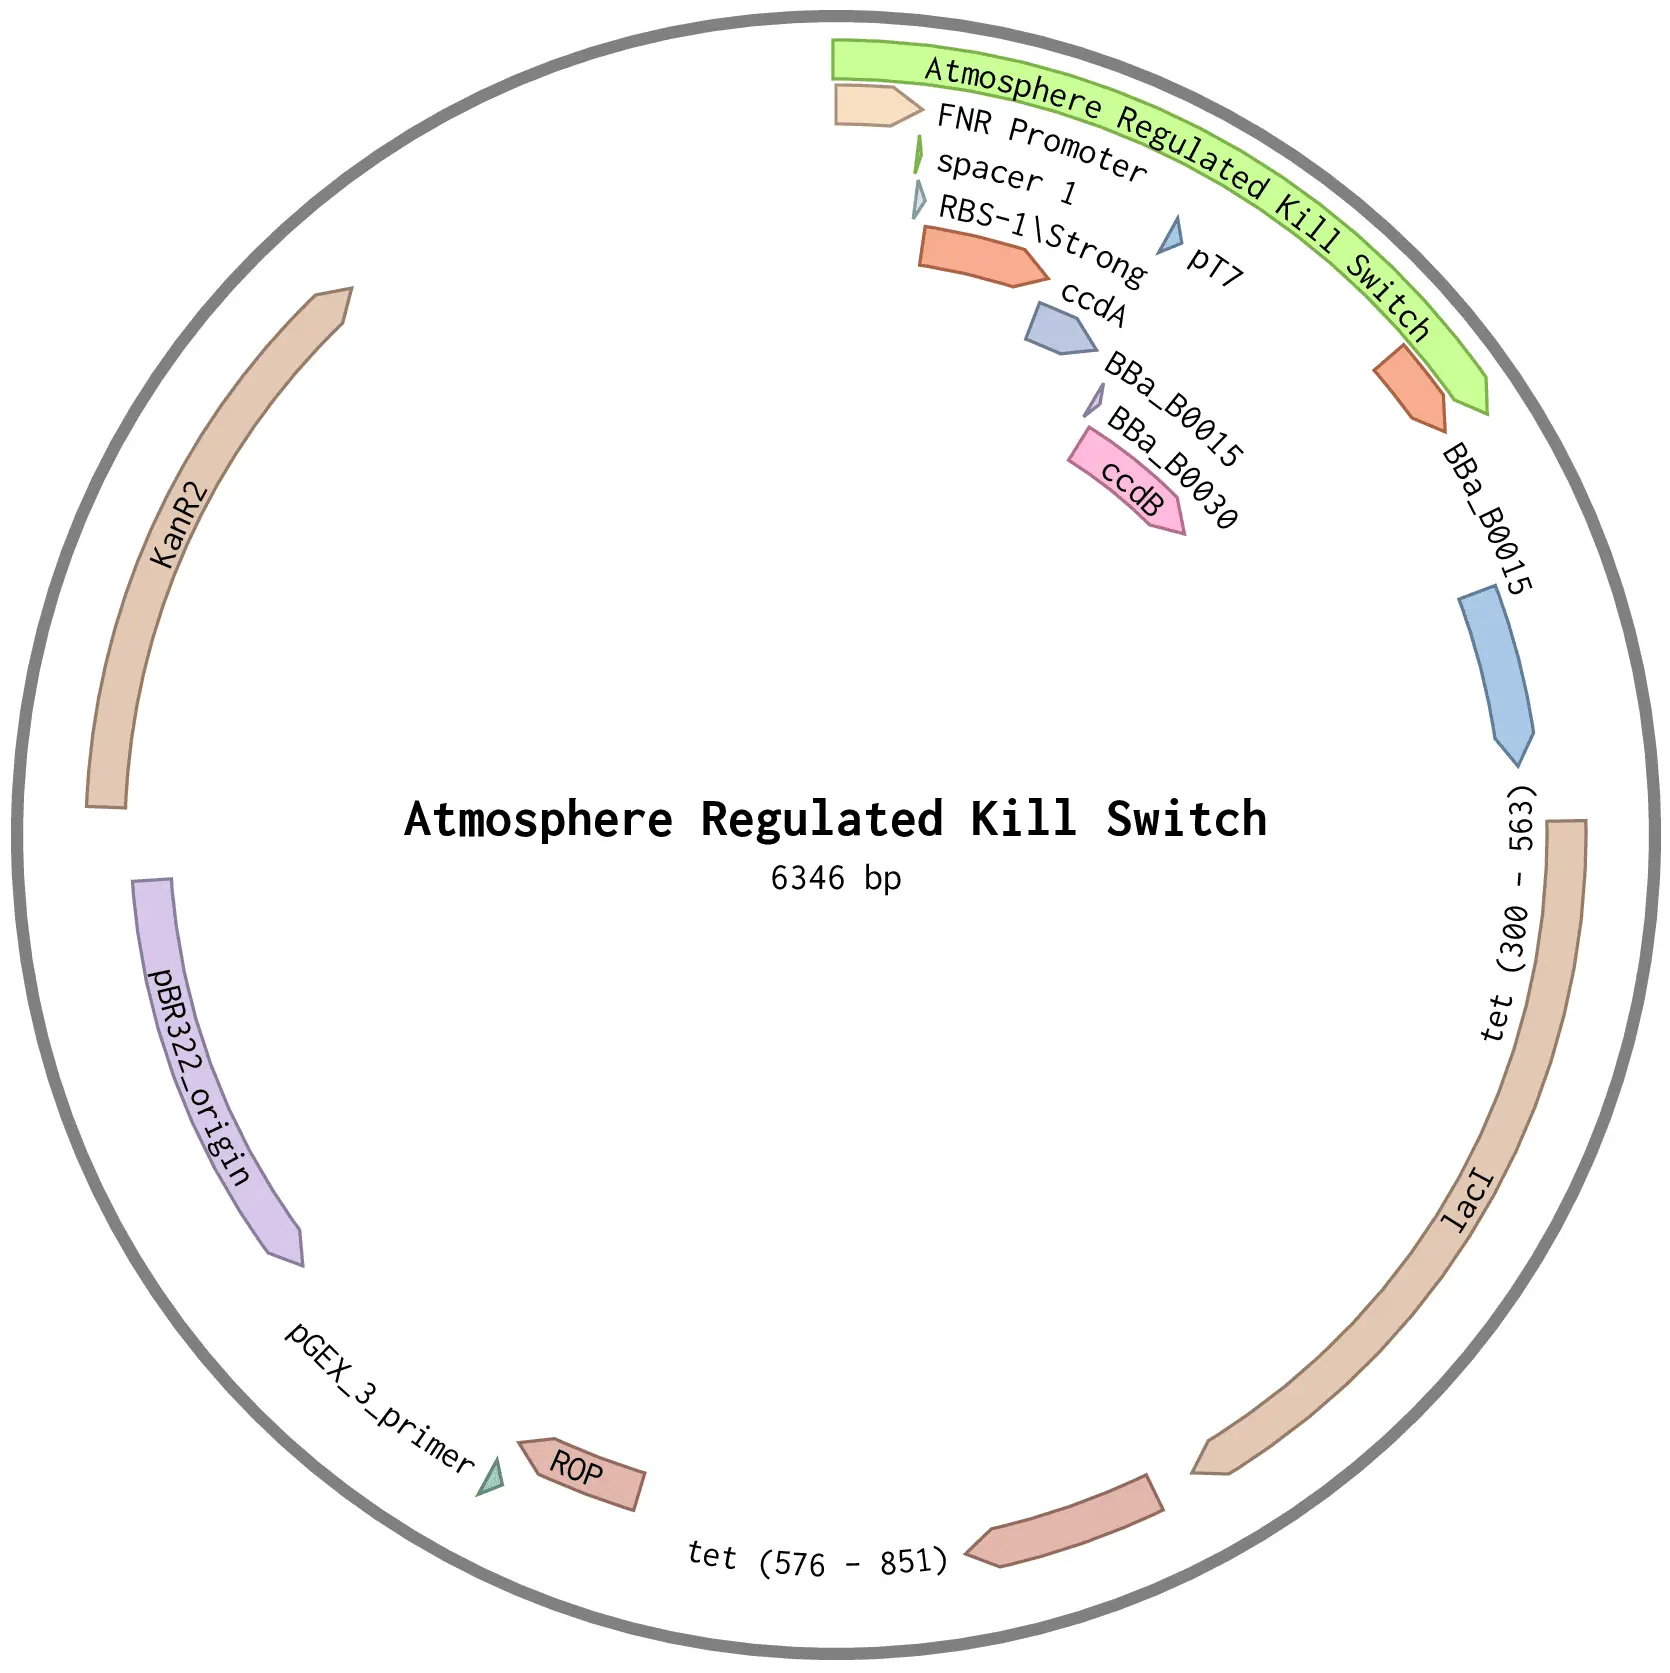 Plasmid for the Atomsphere-regulated Kill Switch